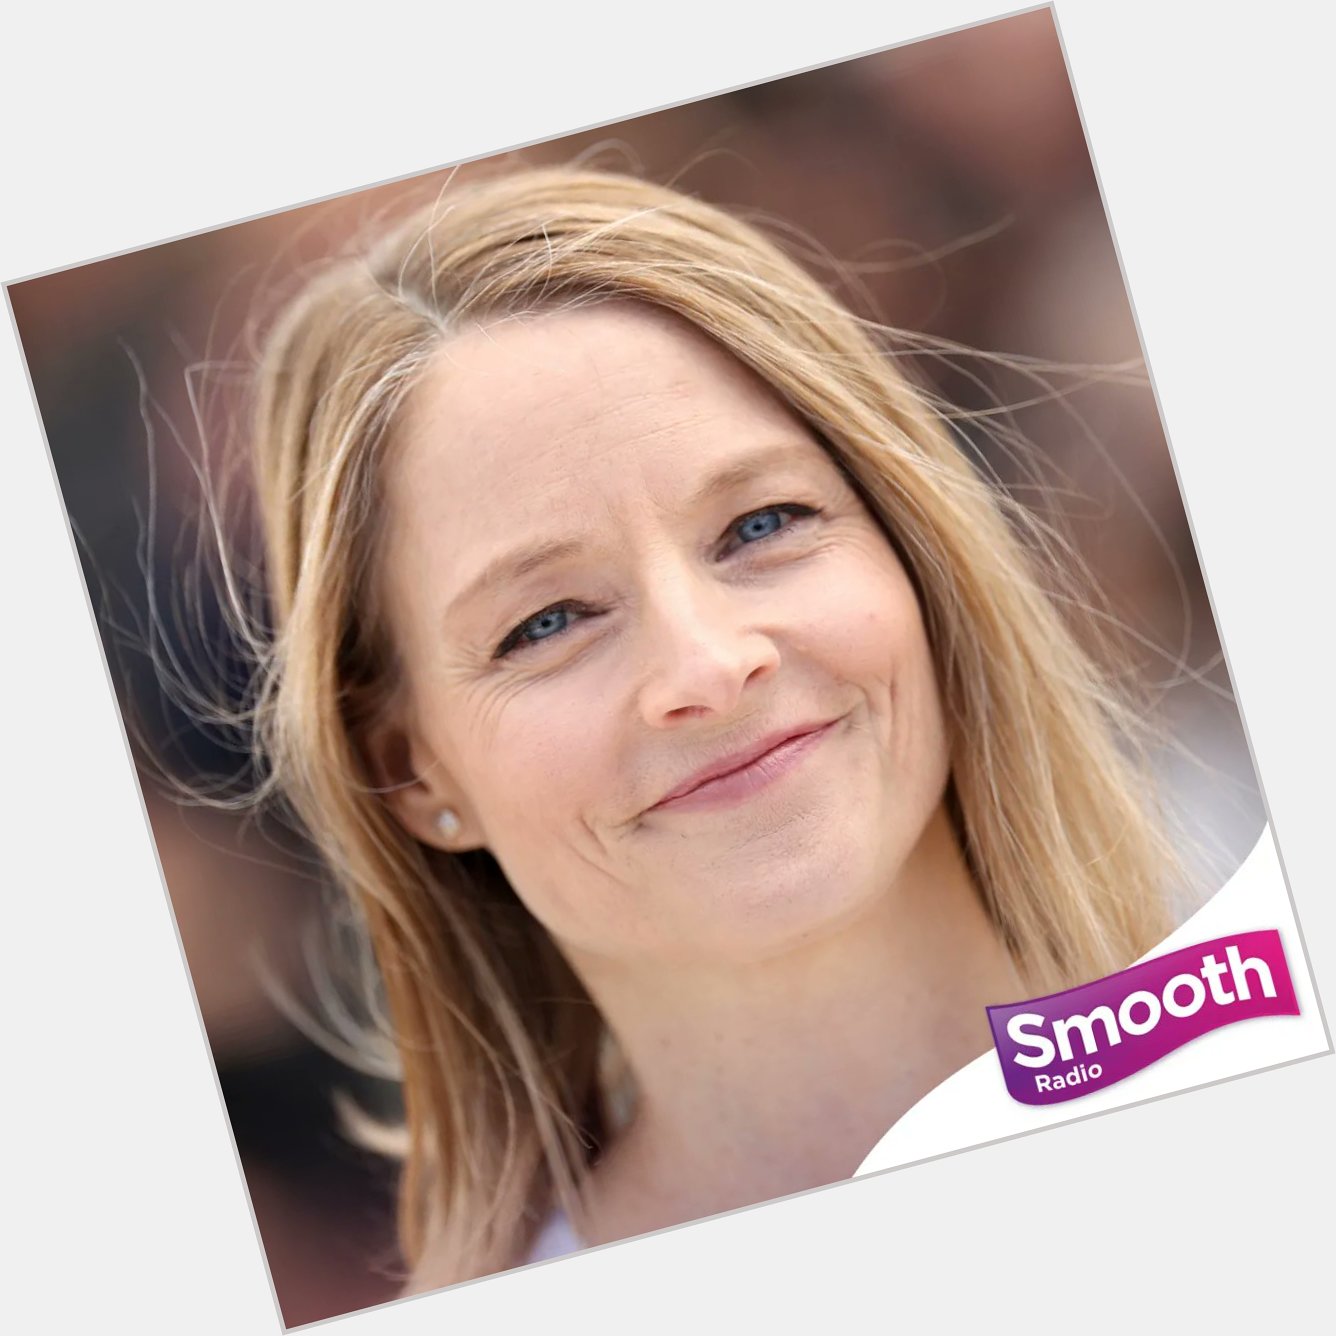 Wishing Jodie Foster a very happy 60th birthday! 